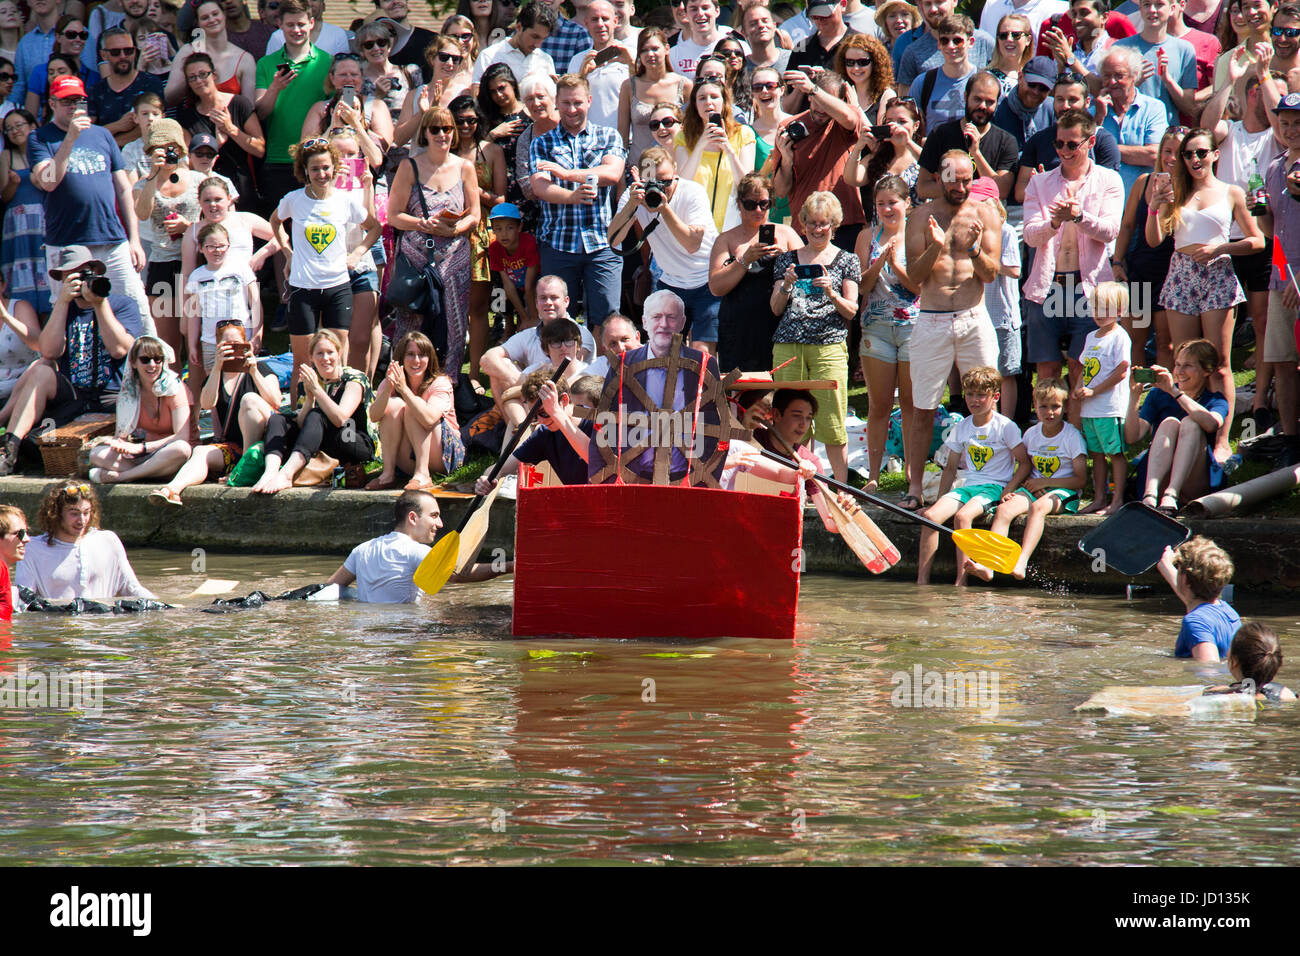 Cambridge, UK. 18th, June, 2017 A cardboard Jeremy Corbyn makes an appearance at annual May week Cardboard Boat Race on the River Cam. CamNews / Alamy Live News Stock Photo